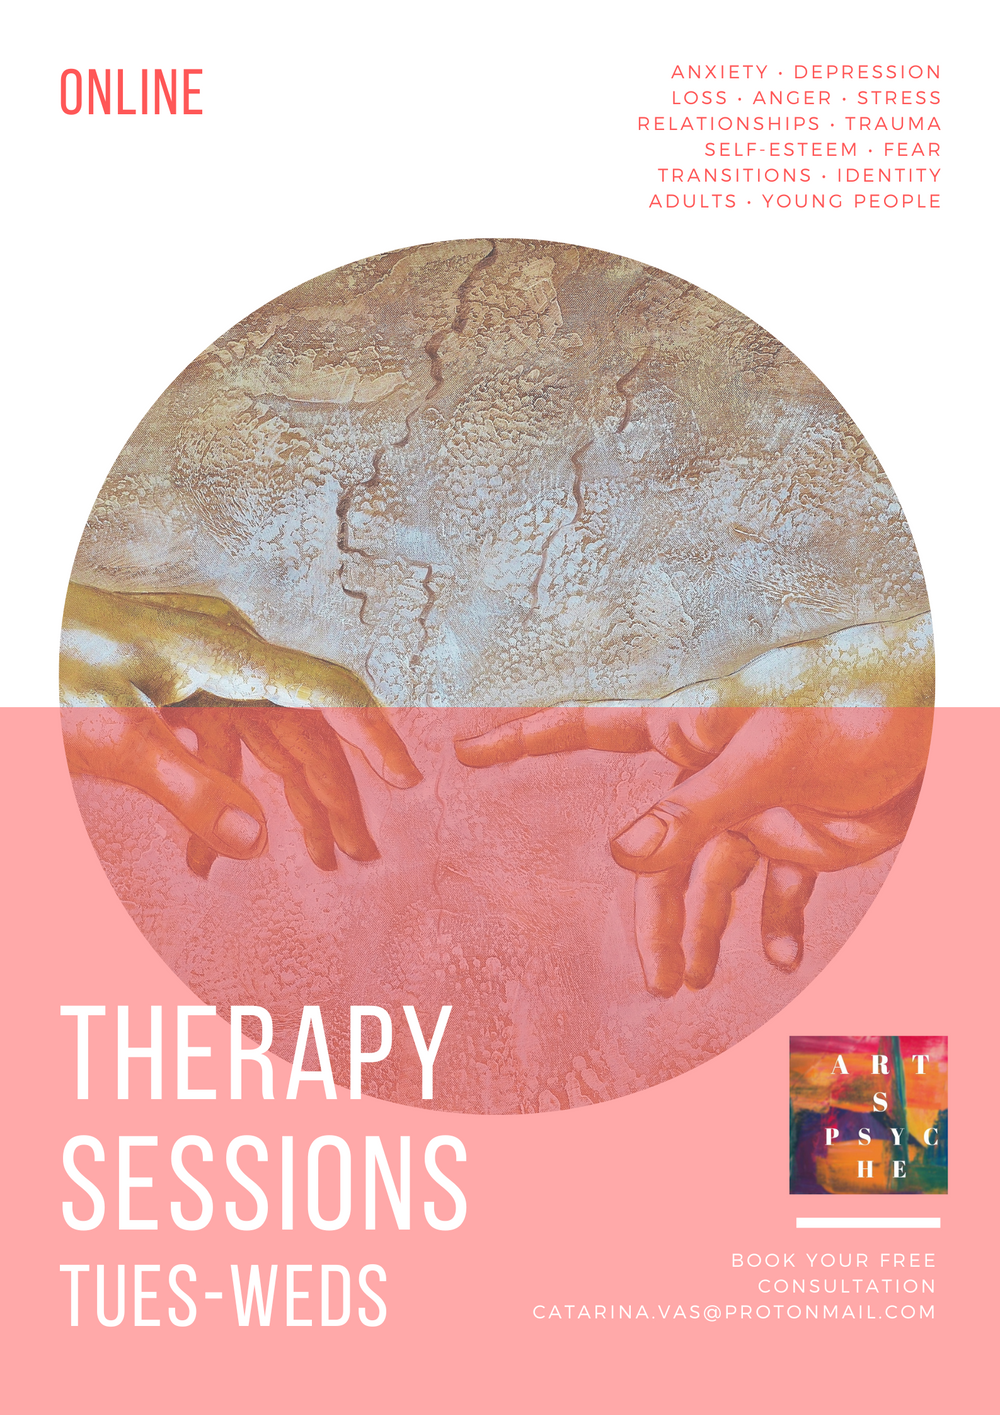 Art therapy and talking sessions available, for adults, elderly and teenagers/ young people 